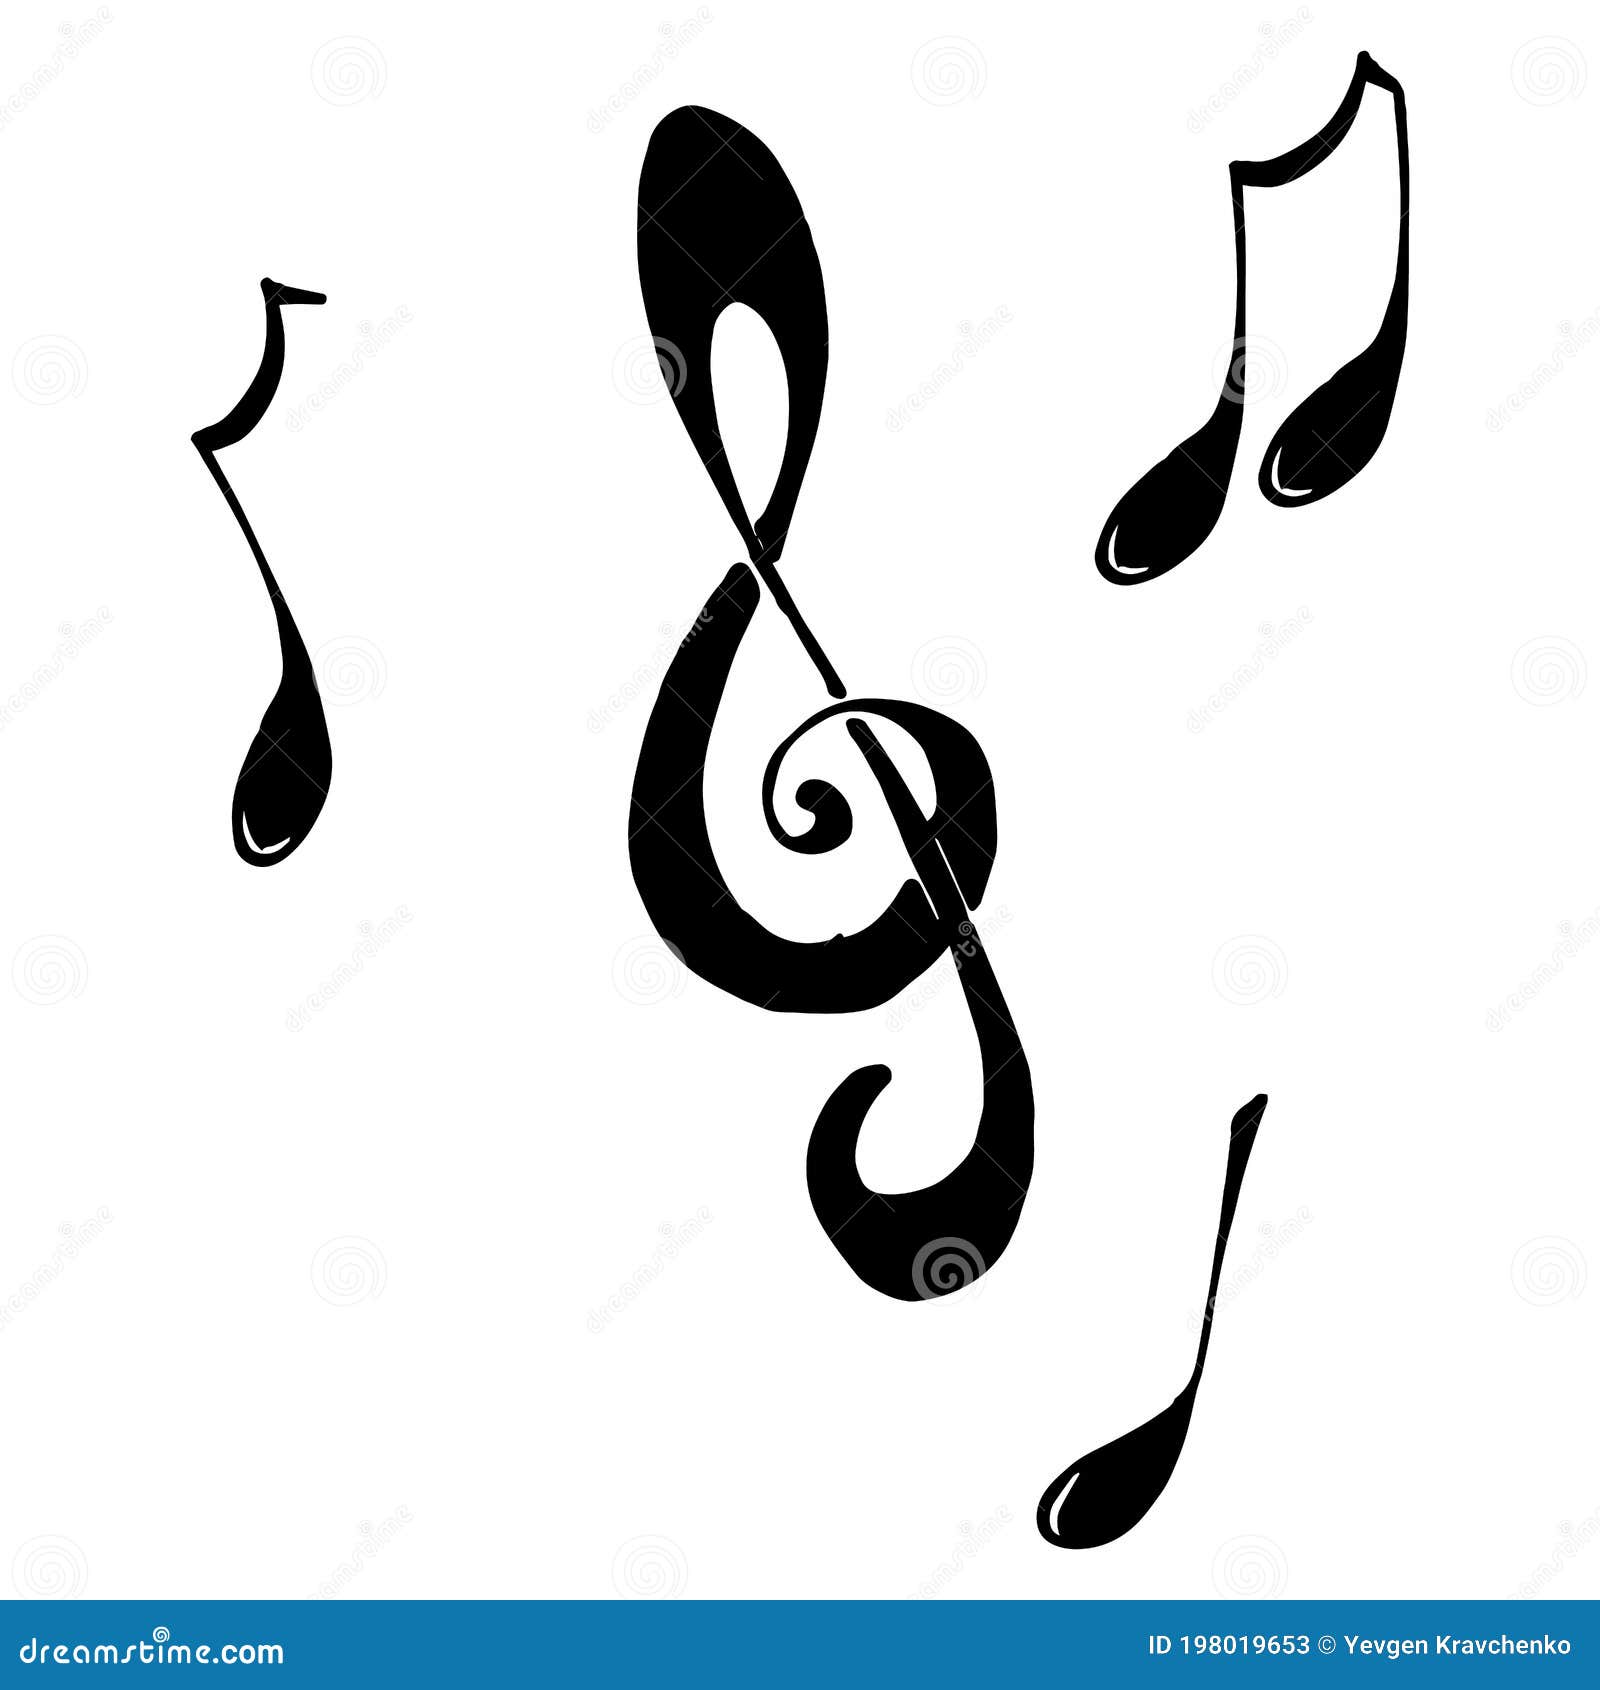 Music Note Sketch - Sketch Music Notes Png - 800x980 PNG Download - PNGkit